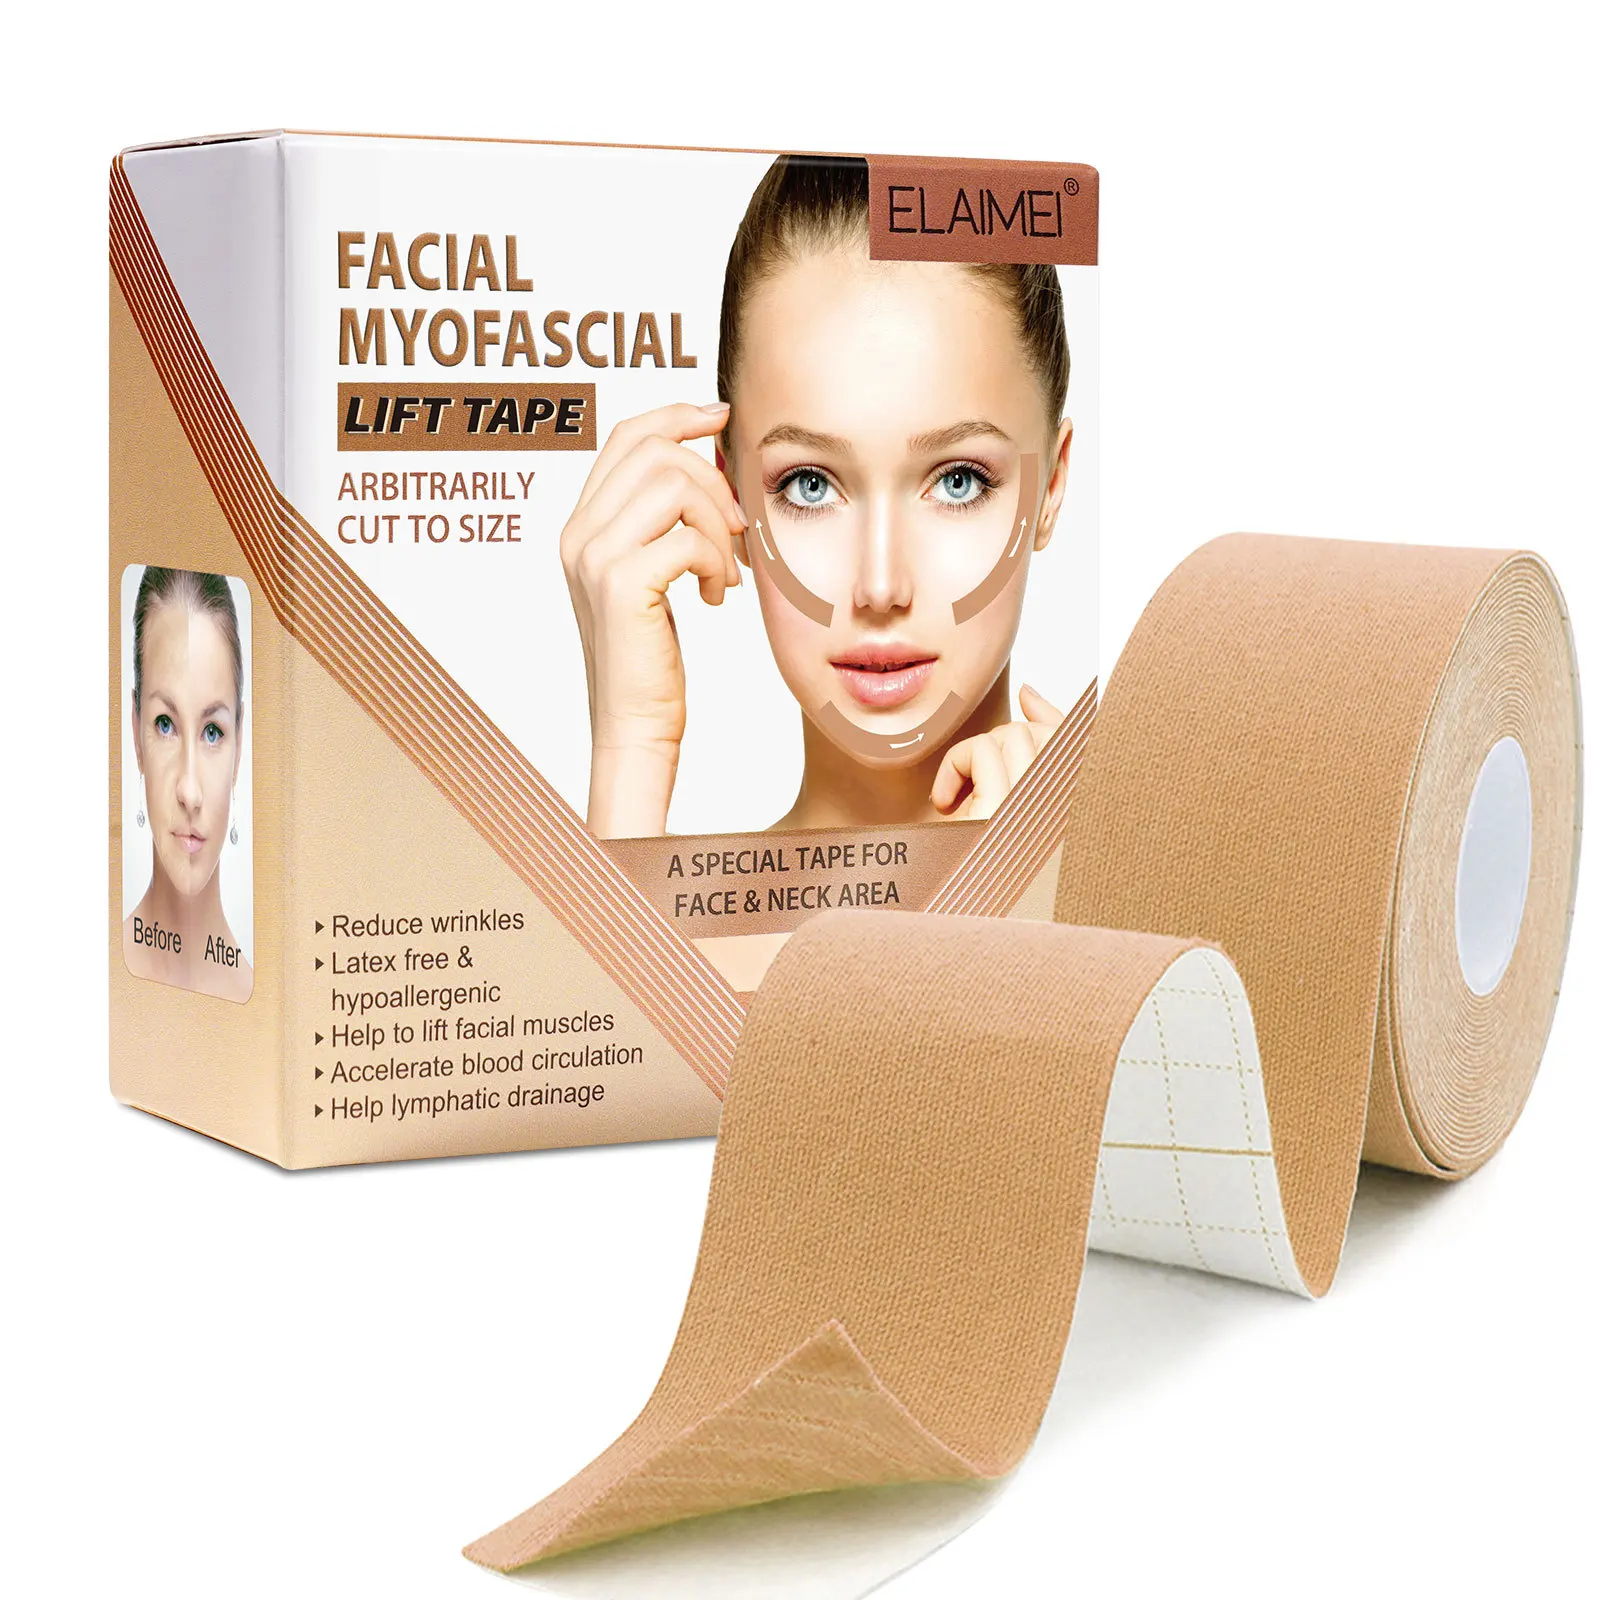 2.5CM*5M Instant Facial Myofascial Lift Tape For Face Neck Eyes Skin Lifting Tool Wrinkle Removal Sticker V Face Elastic Bandage new invisible facial slimming tape wrinkle removal face stickers neck eye lifter sticker anti aging patch face lift tape